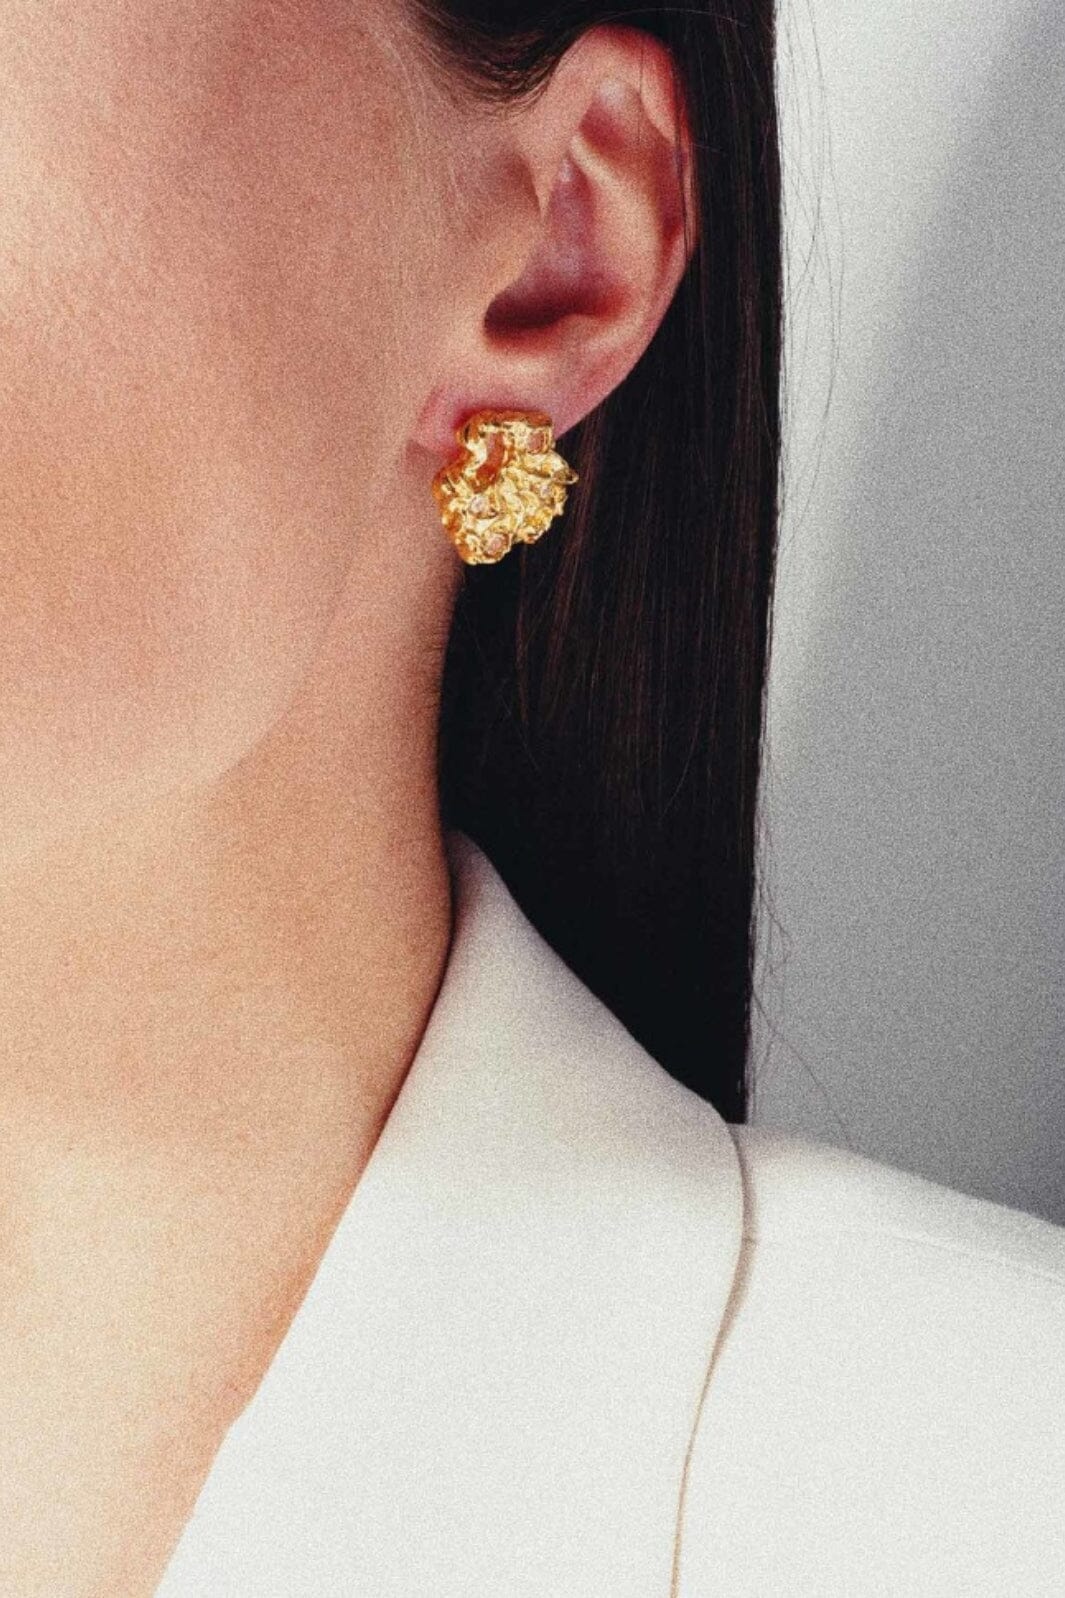 House Of Vincent - Mythical Fate Earrings - Gilded 